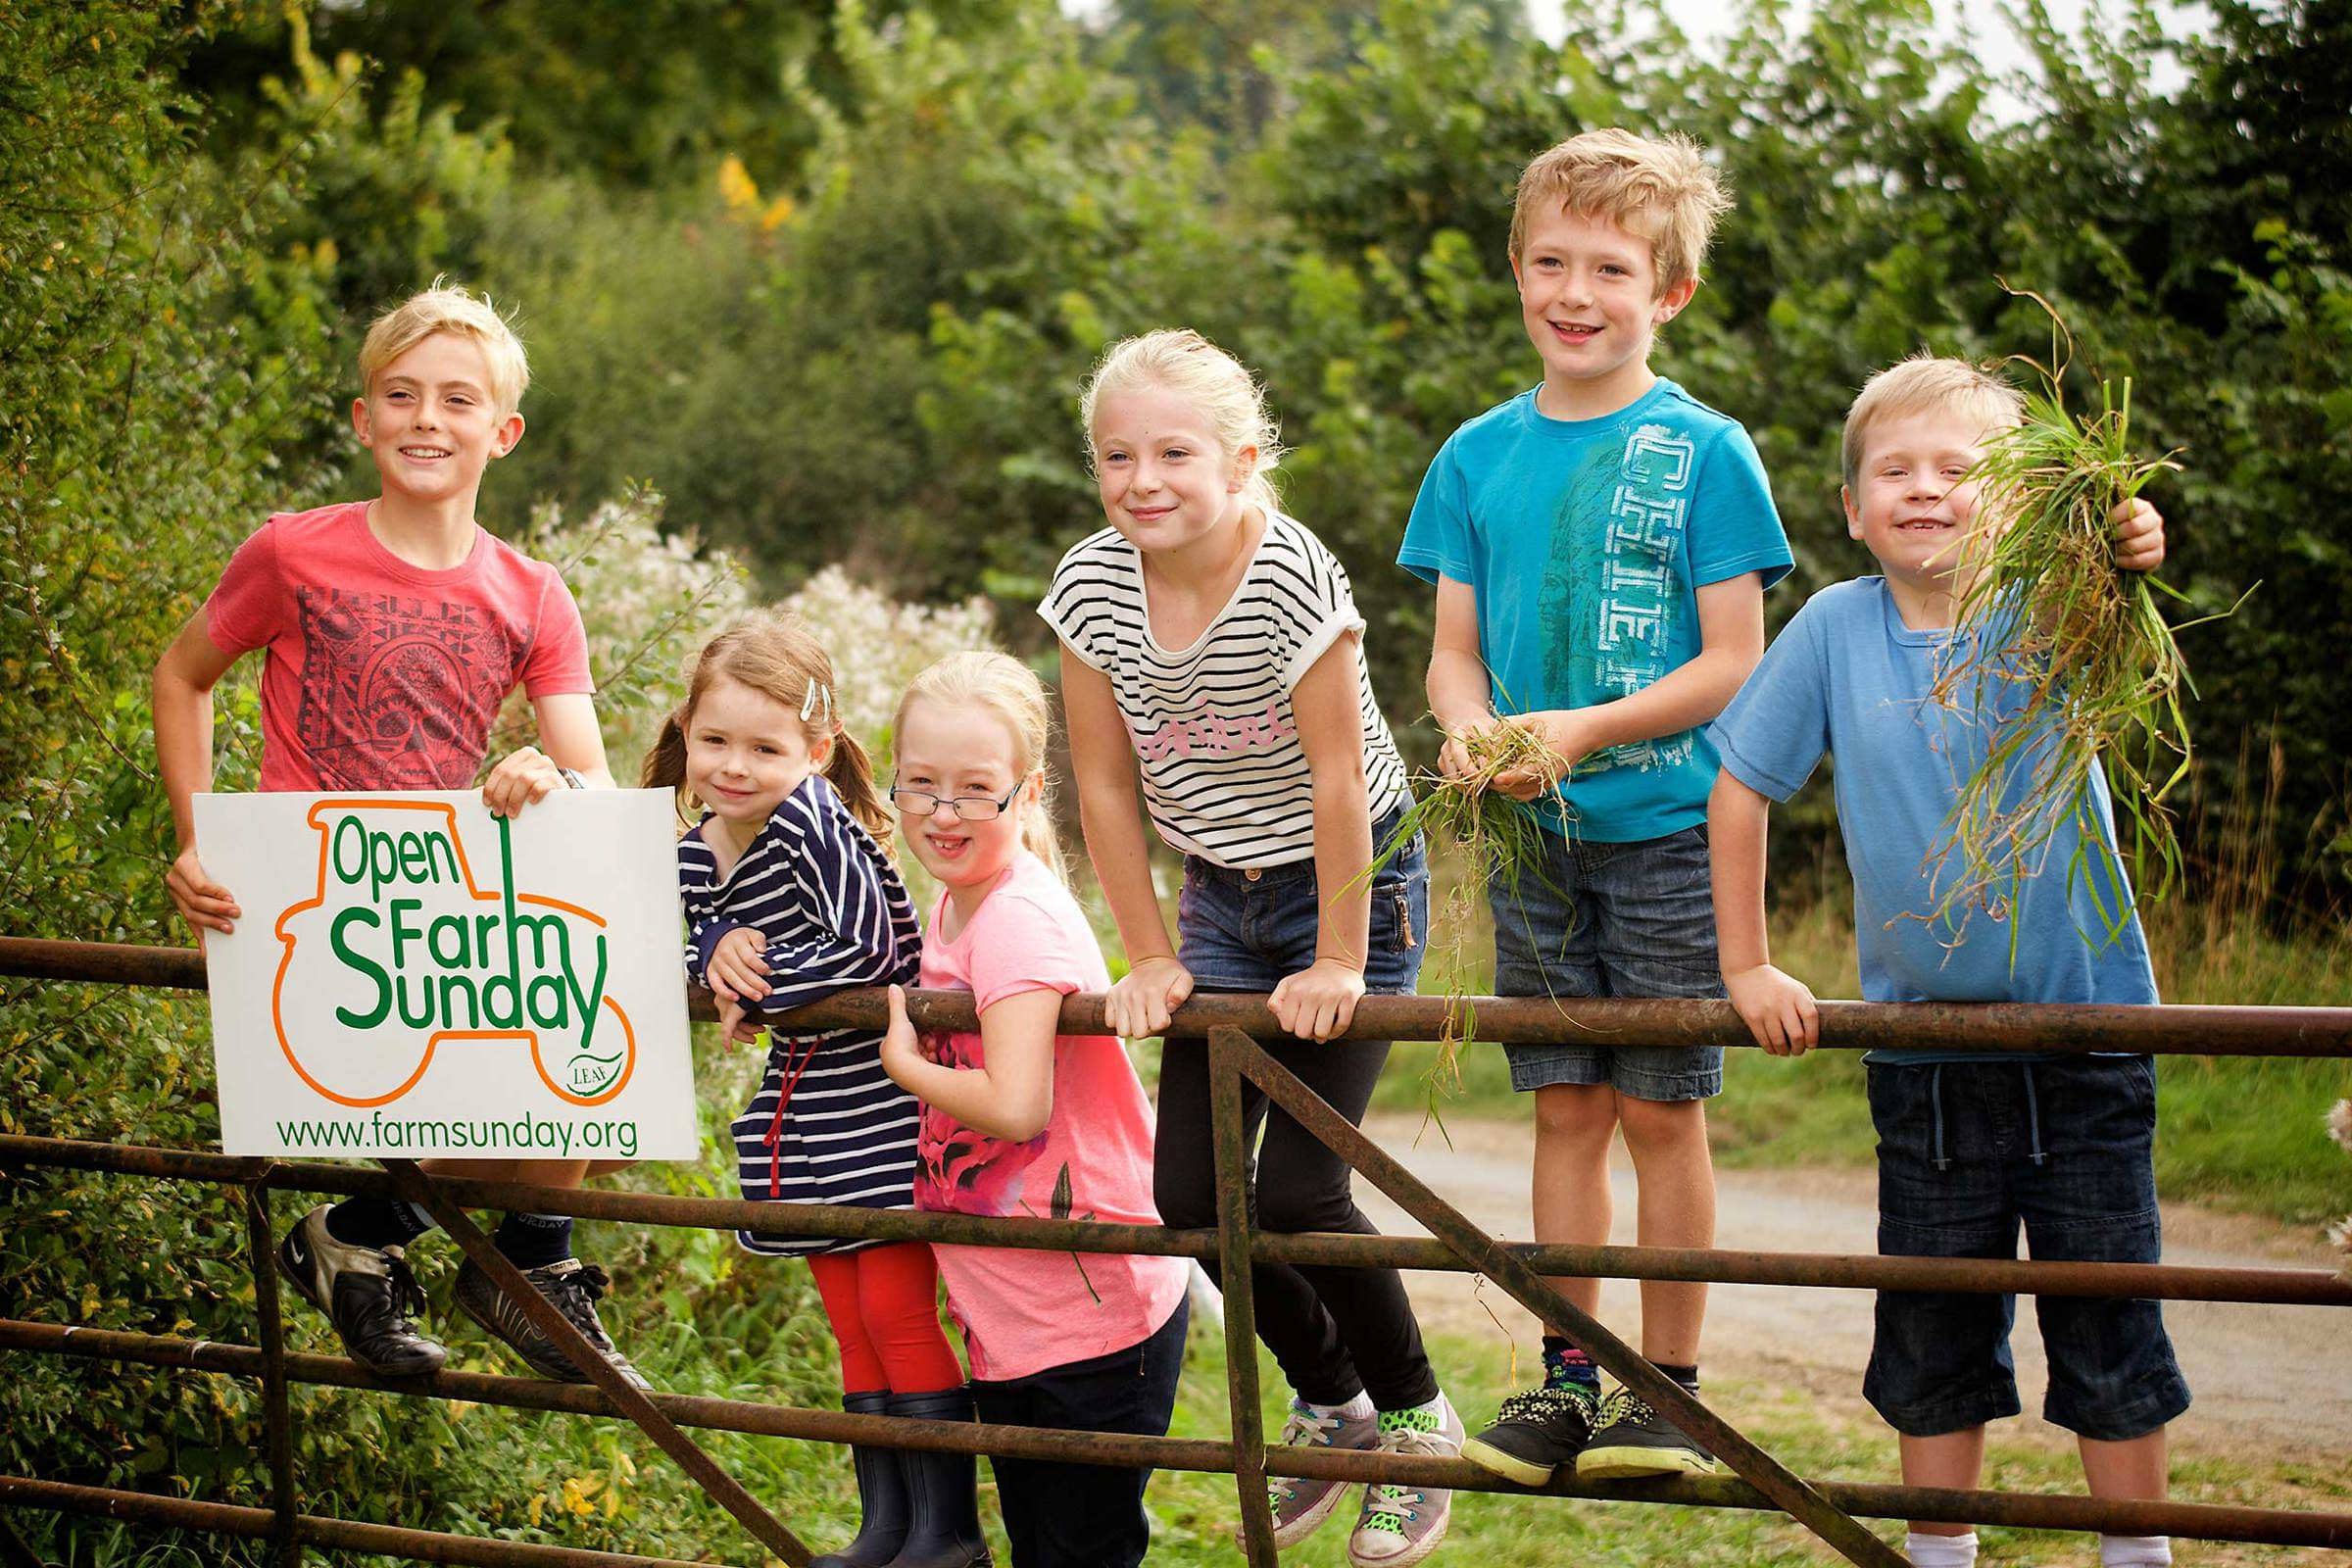 Children standing on farm gate one of whom is holding an Open Farm Sunday sign